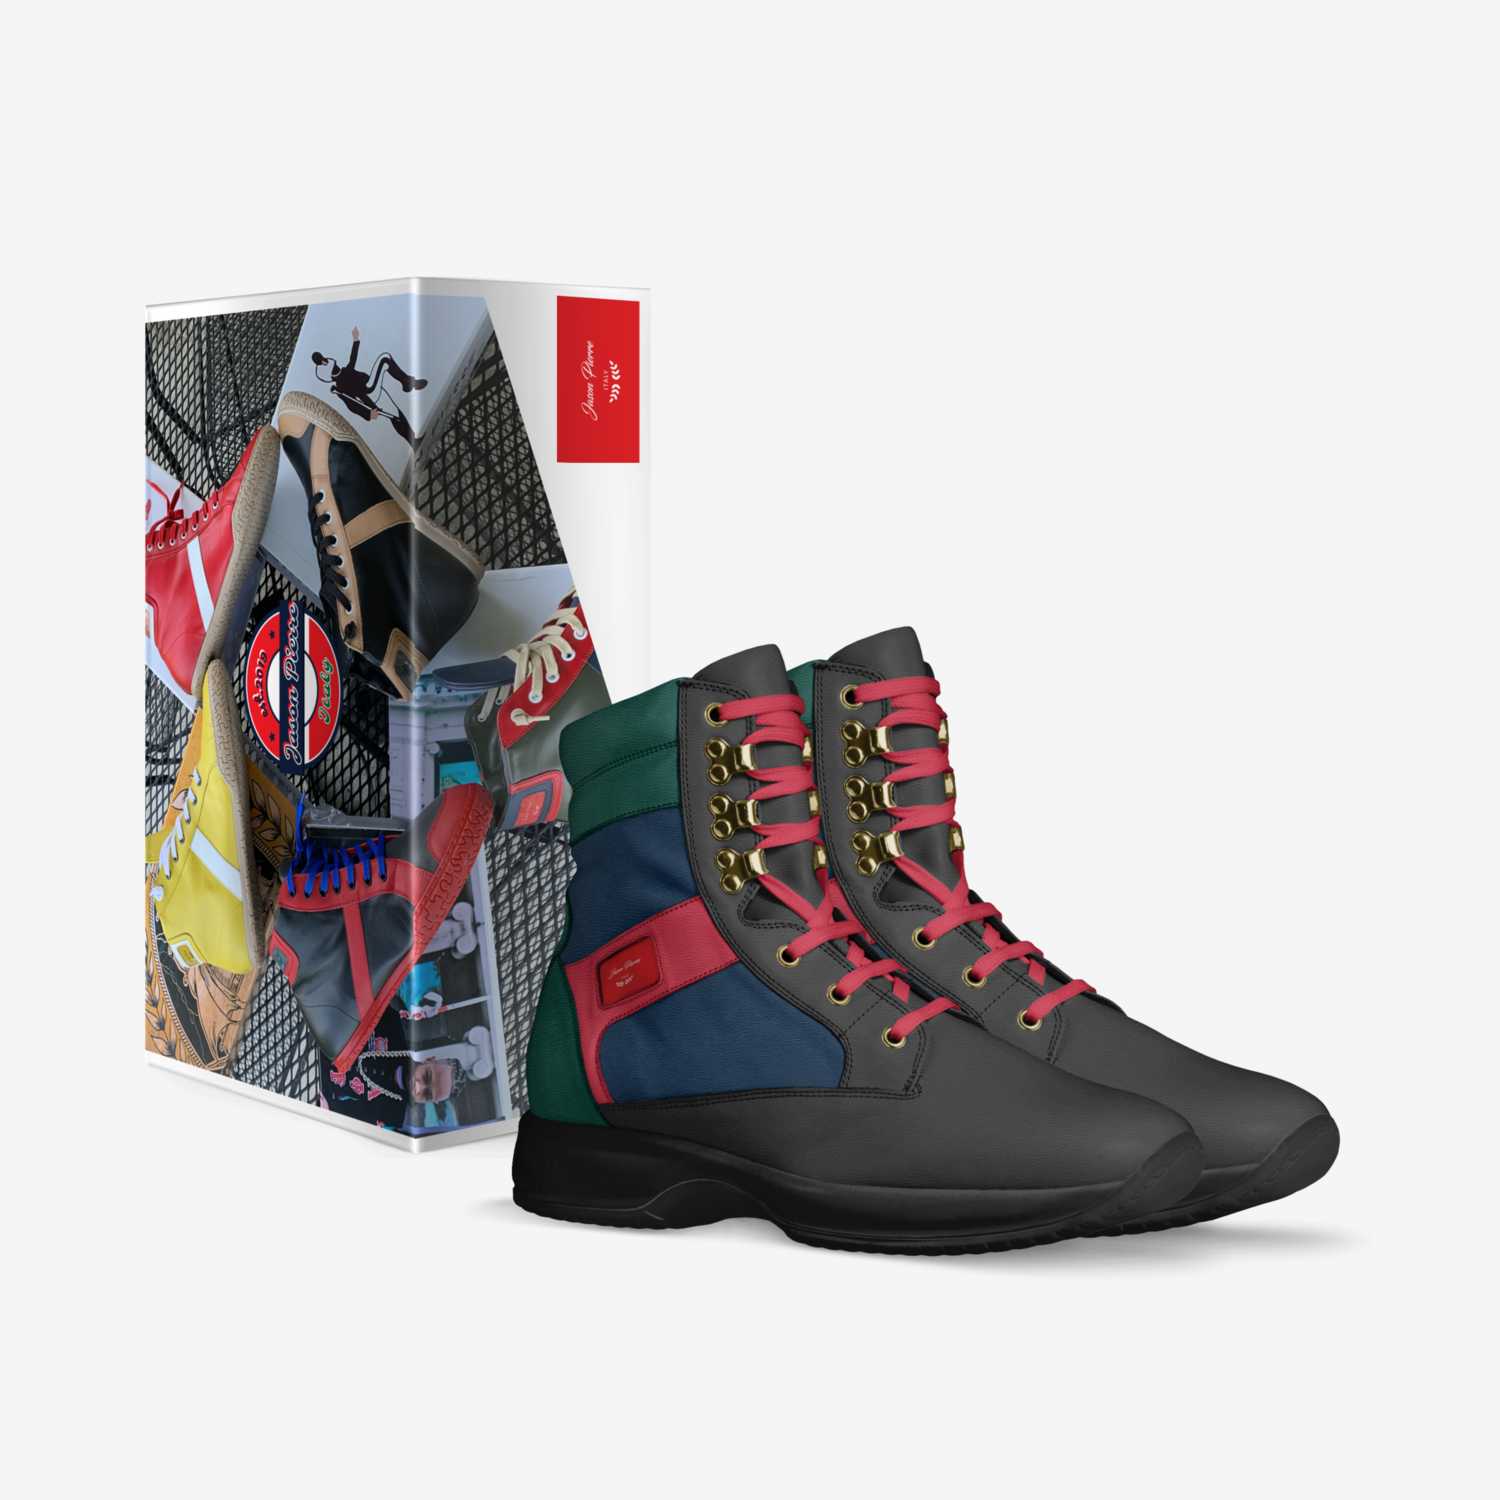 Jason Pierre custom made in Italy shoes by Jason Pierre | Box view